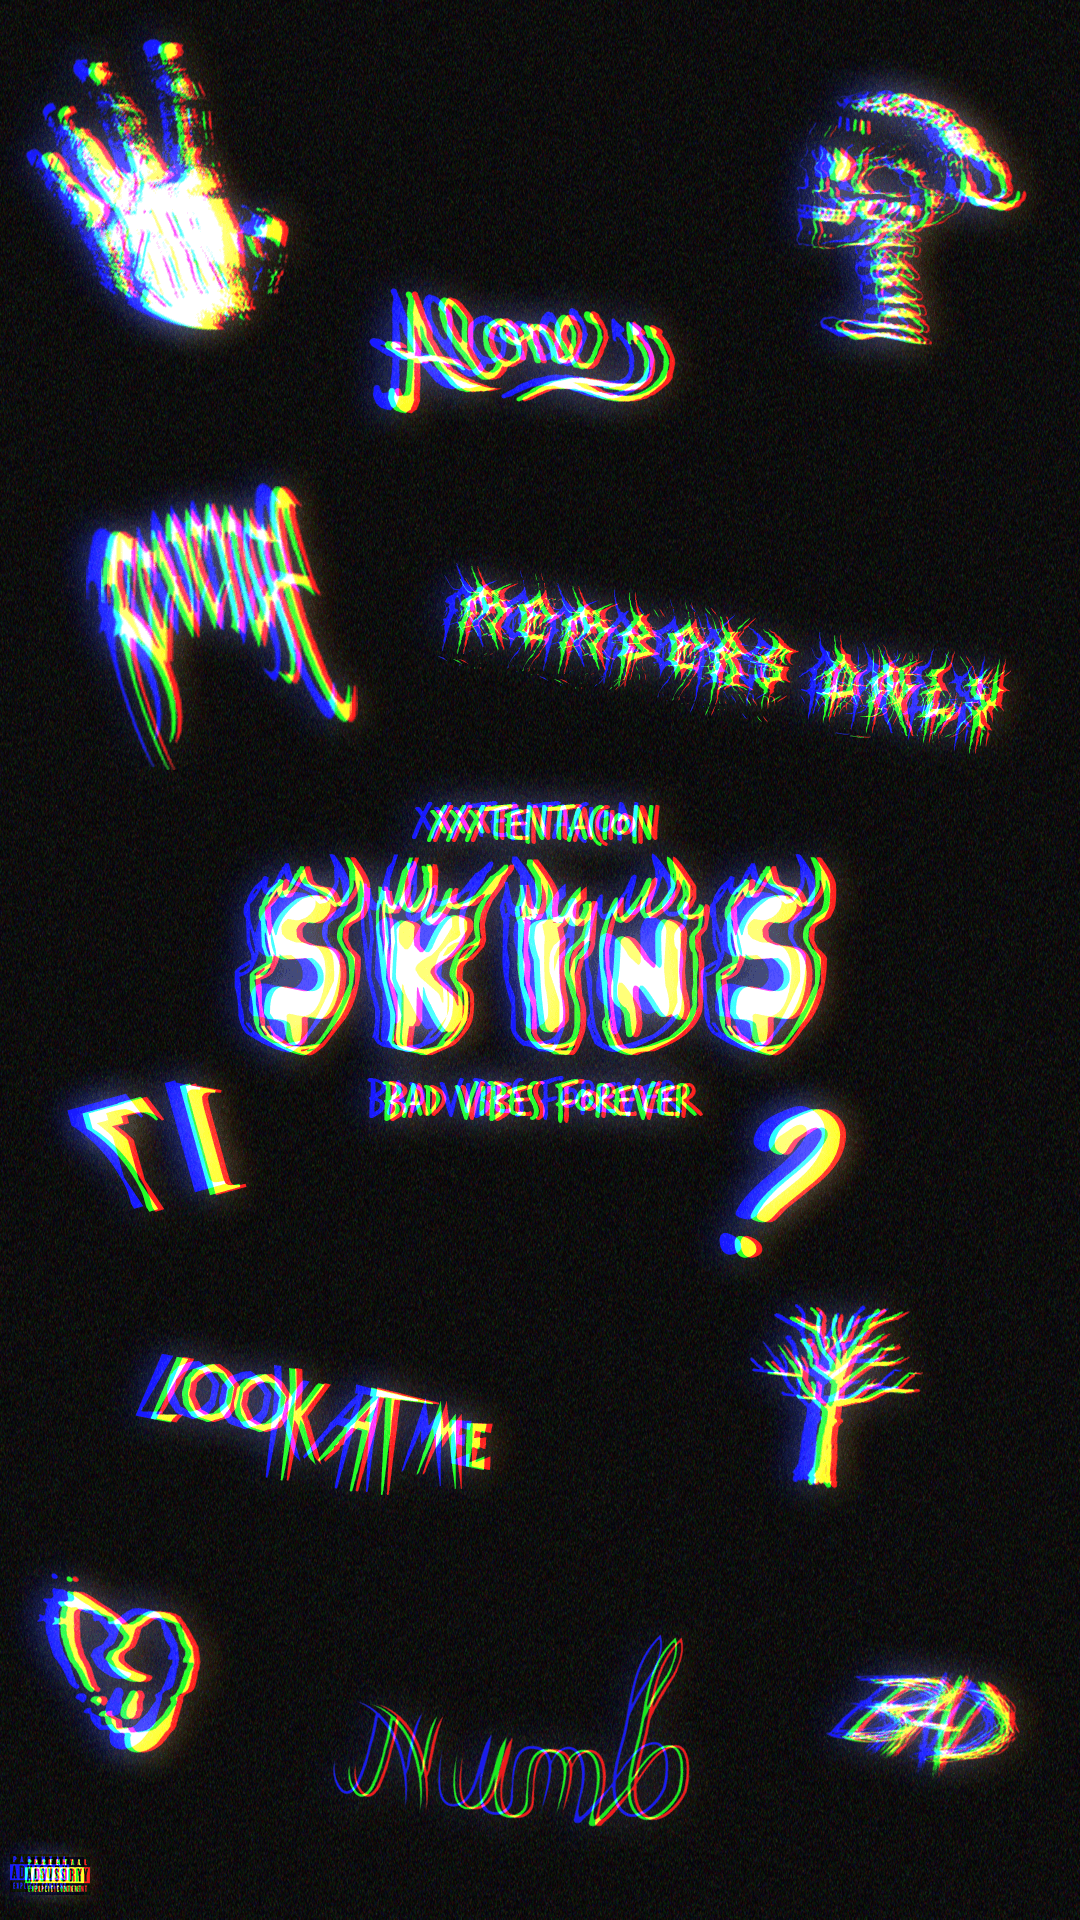 Made a coverart for 'skins'